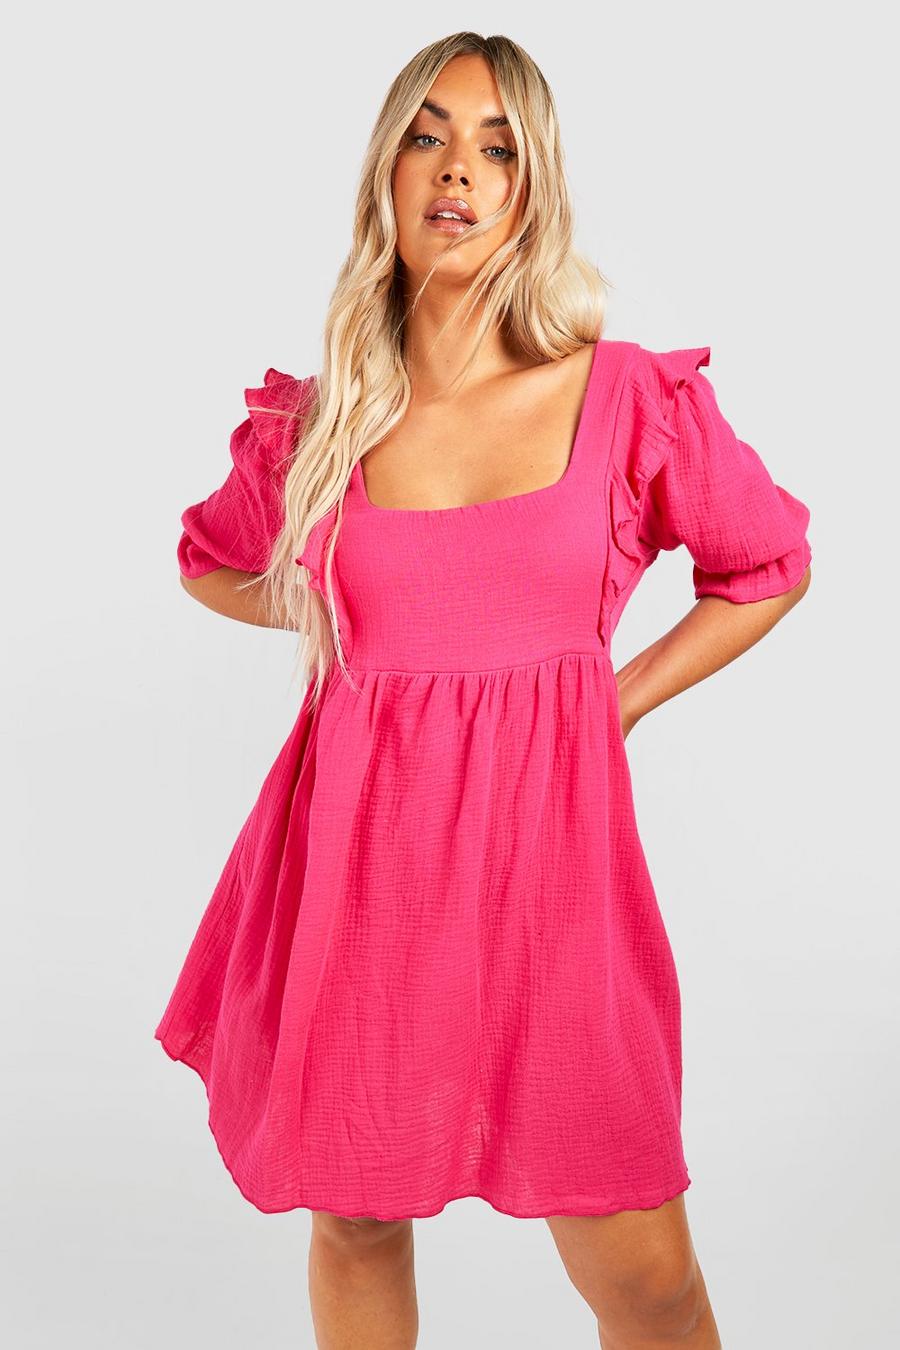 Grande taille - Robe à volants, Hot pink